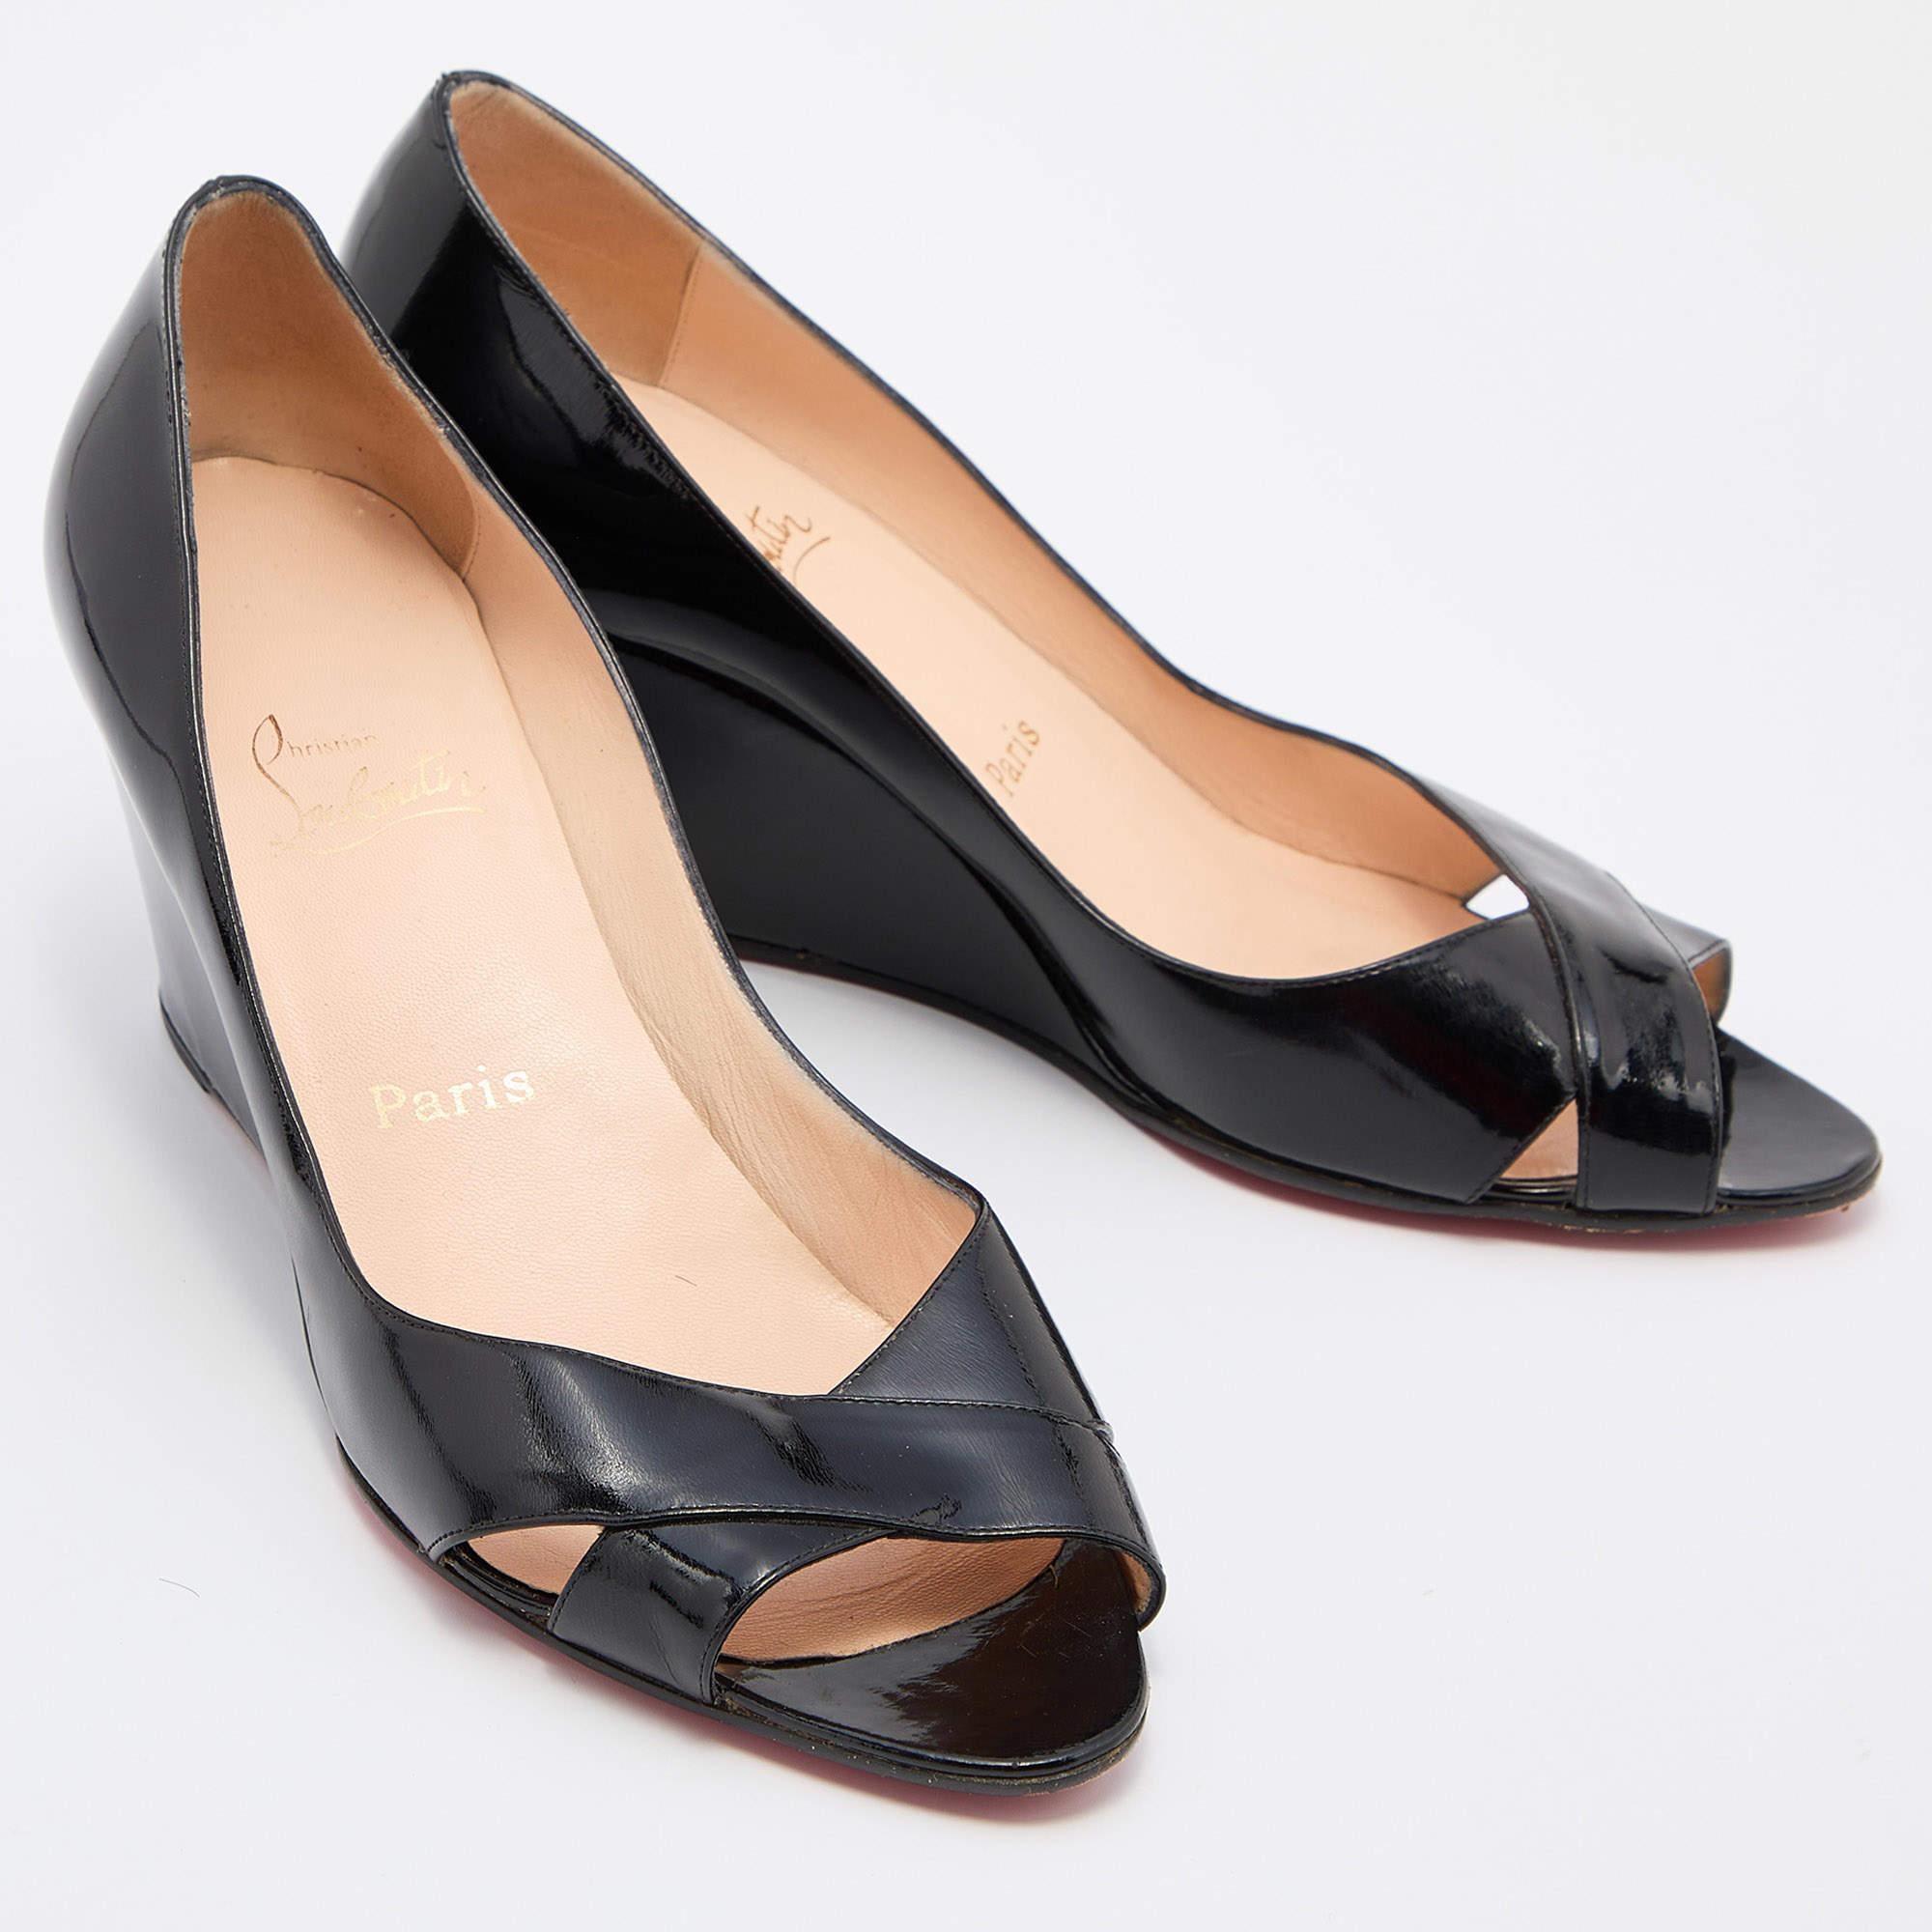 Christian Louboutin Black Patent Leather Riveto Wedges Pumps Size 41 For Sale 1